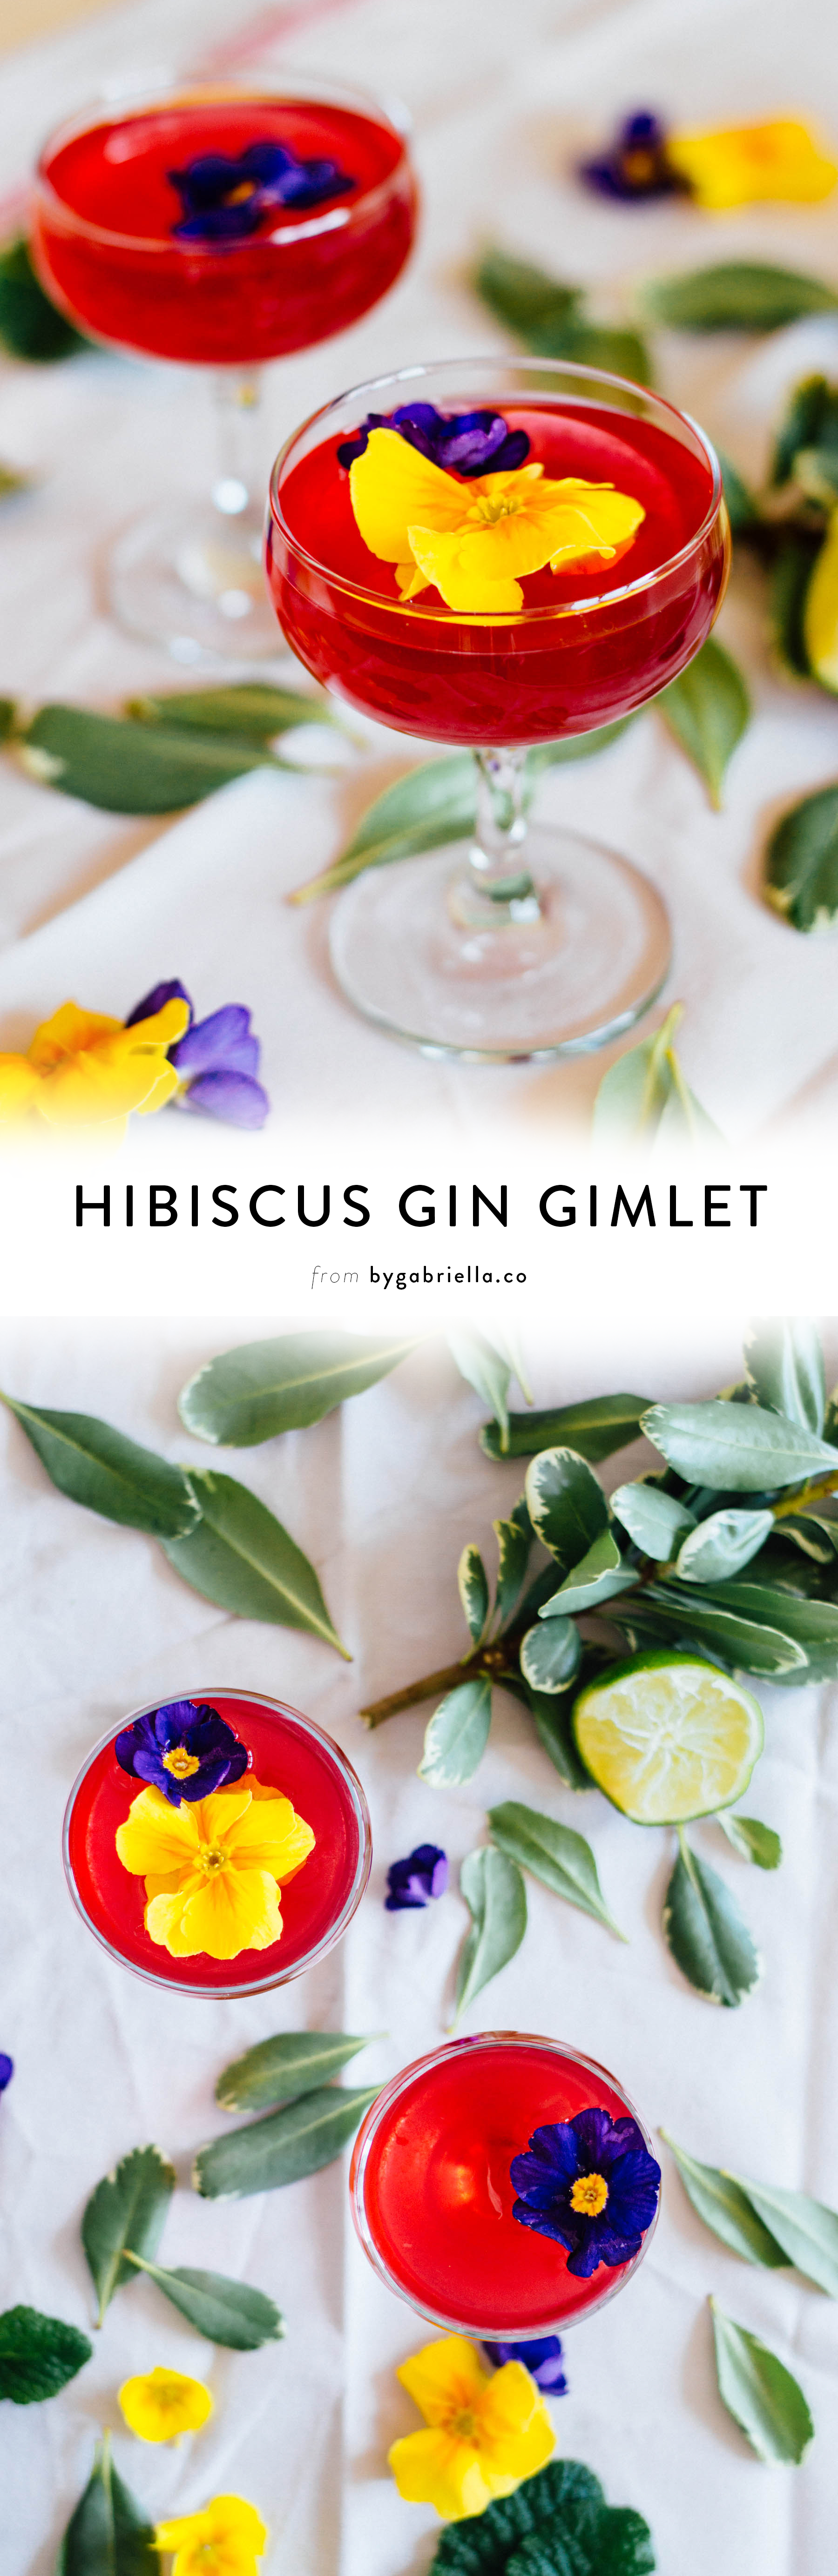 An herbal Hibiscus Gin Gimlet recipe with you guessed it - herbal tea and edible flowers! Click through for the full recipe | bygabriella.co